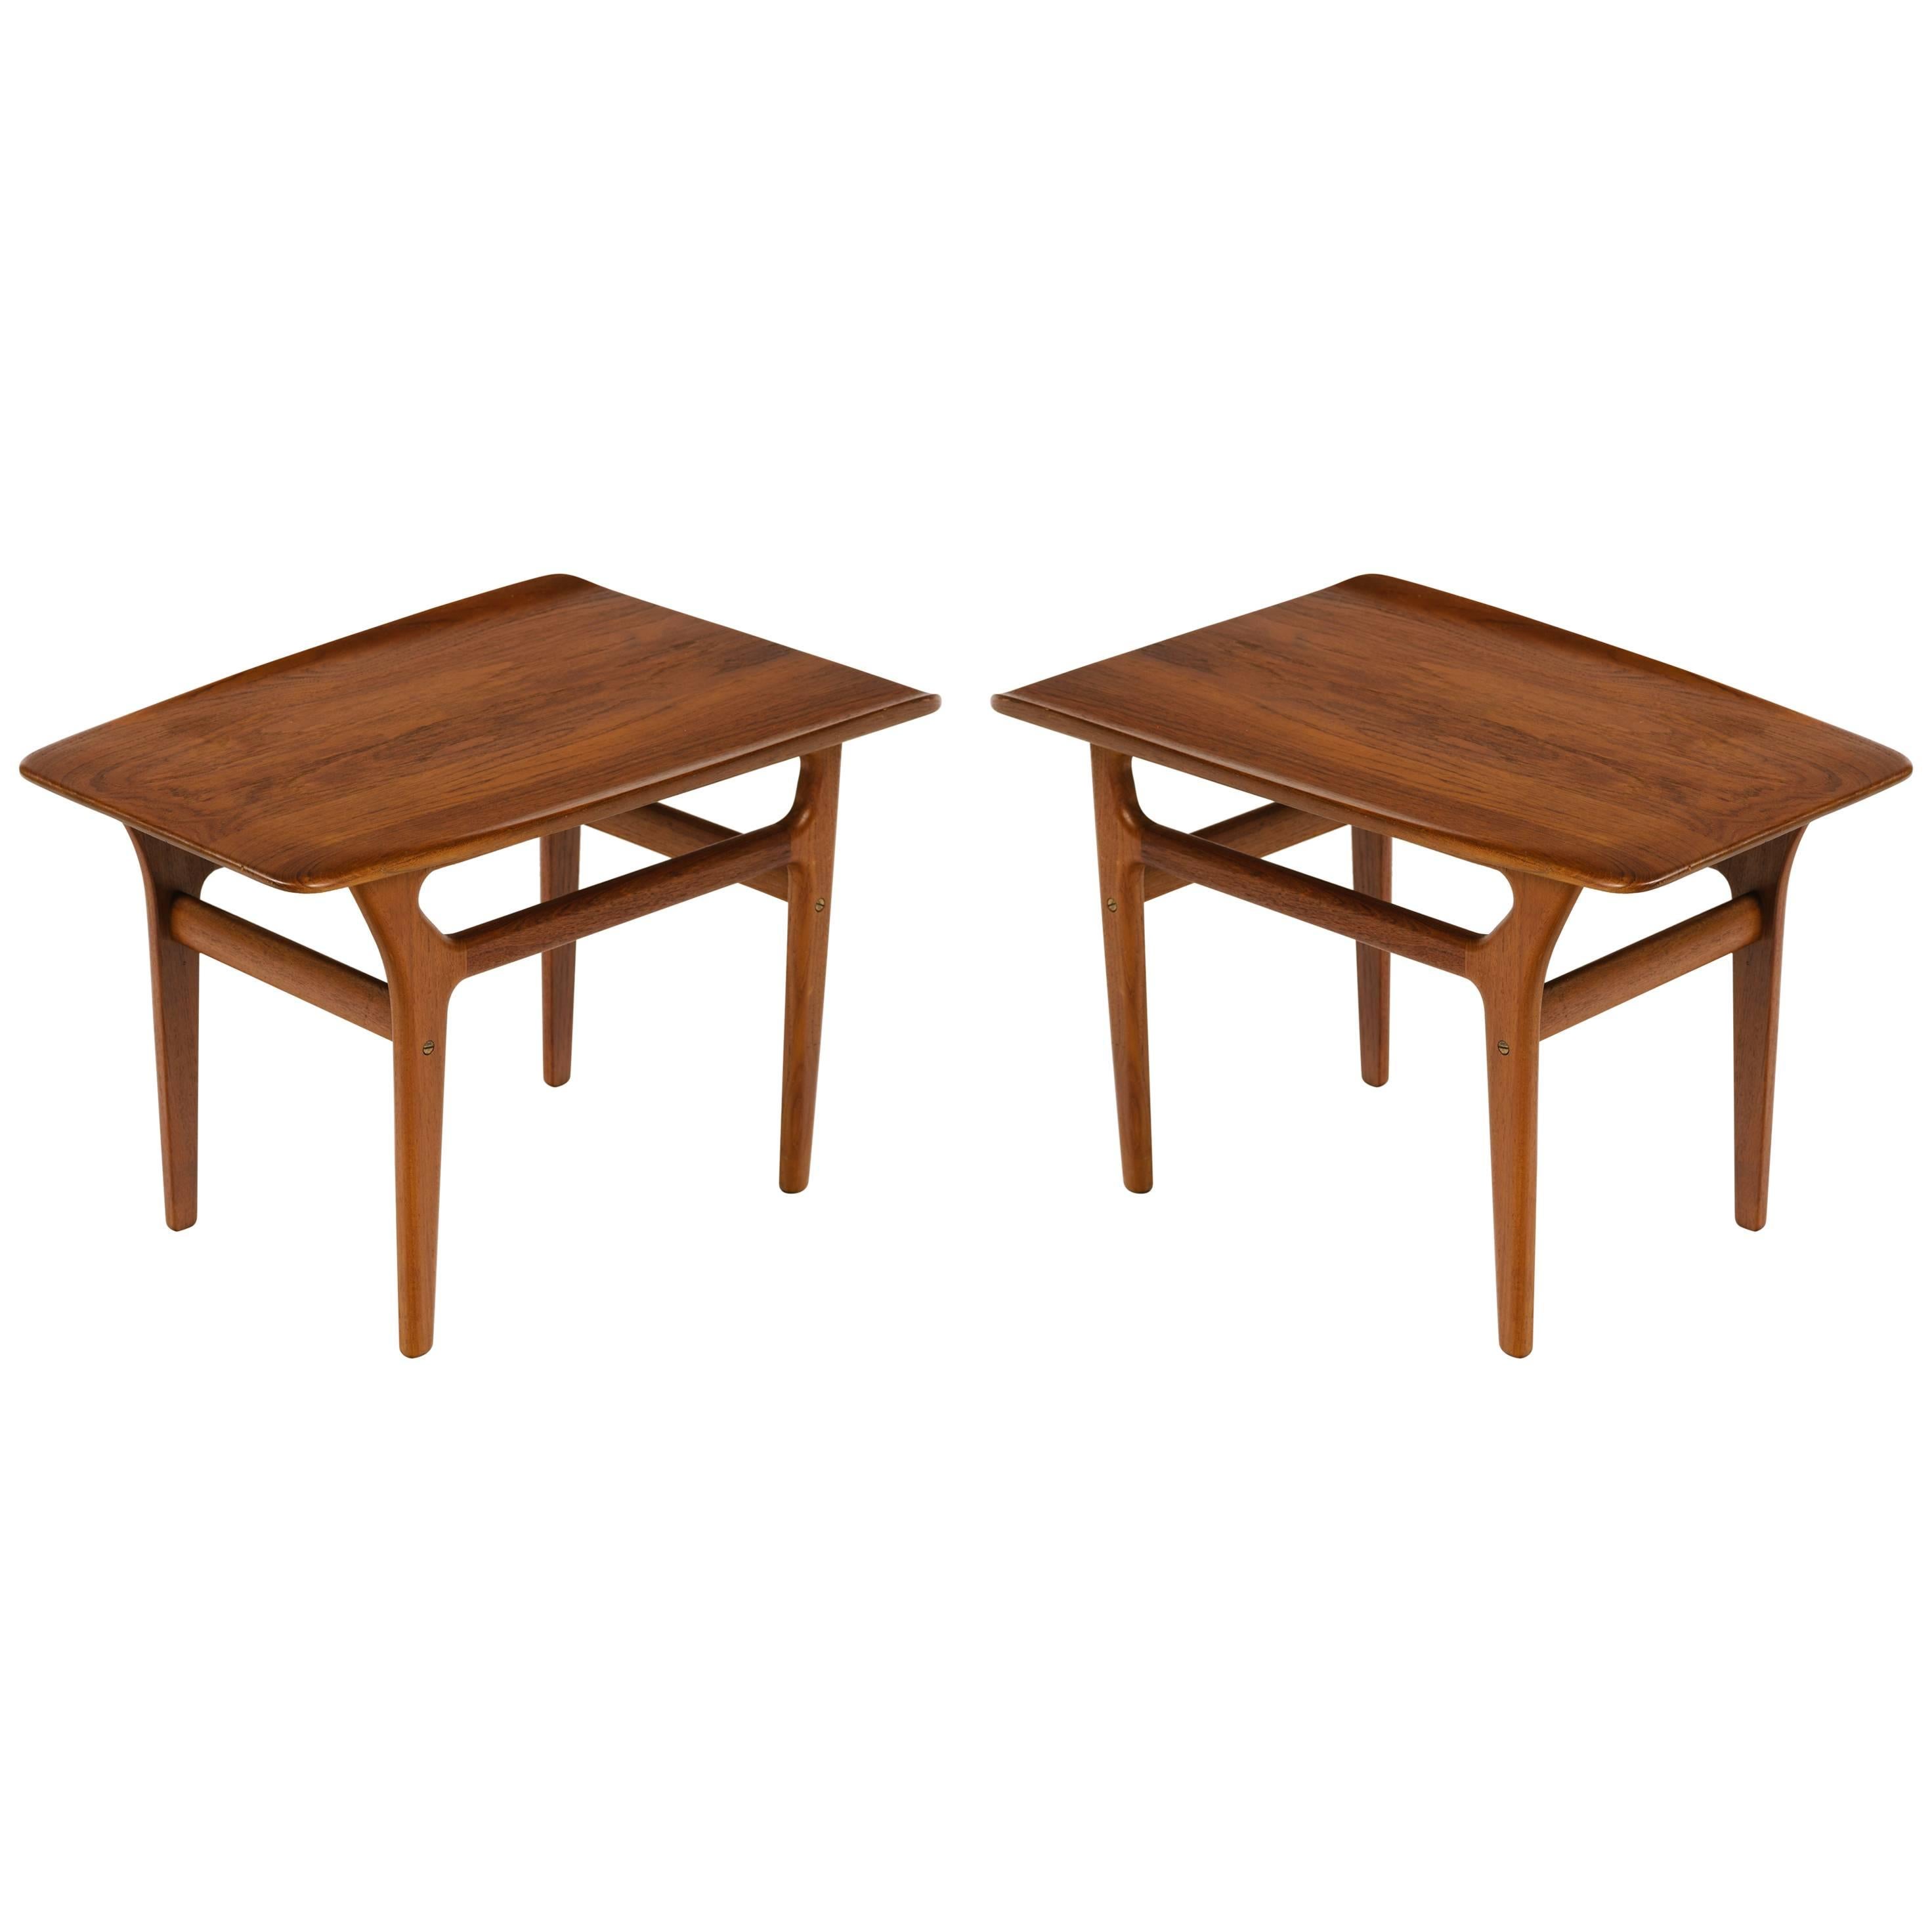 Pair of teak Mid-Century Modern end tables with streamline design. Fabulous sleek angles throughout, with tapered leg design and slightly curved tops. Stamped Denmark on the underside of tables.